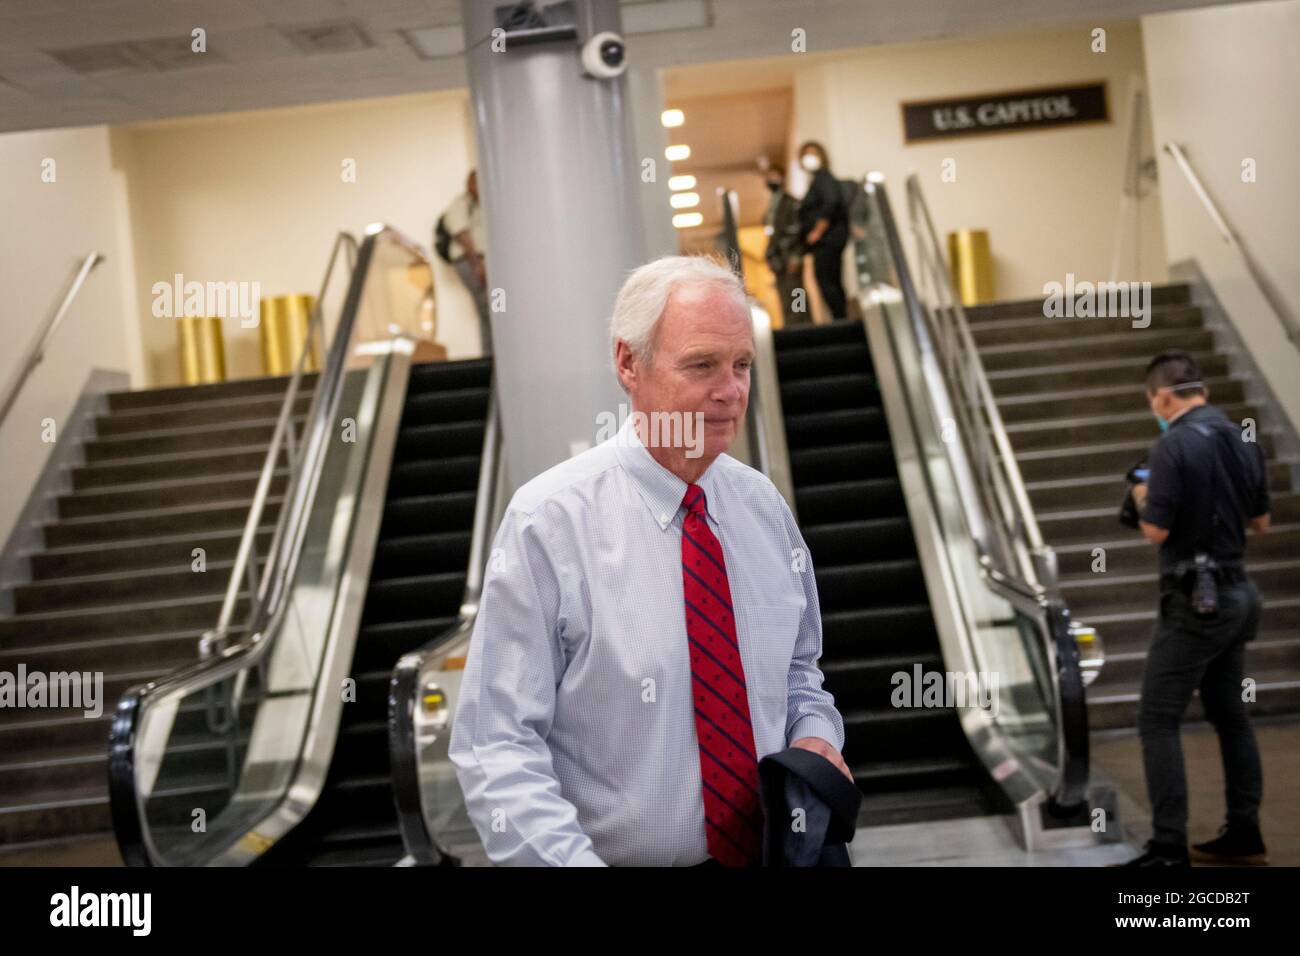 United States Senator Ron Johnson (Republican of Wisconsin) walks through the Senate subway at the US Capitol during a vote in Washington, DC, Saturday, August 7, 2021. (Photo by Rod Lamkey / CNP/Sipa USA) Stock Photo